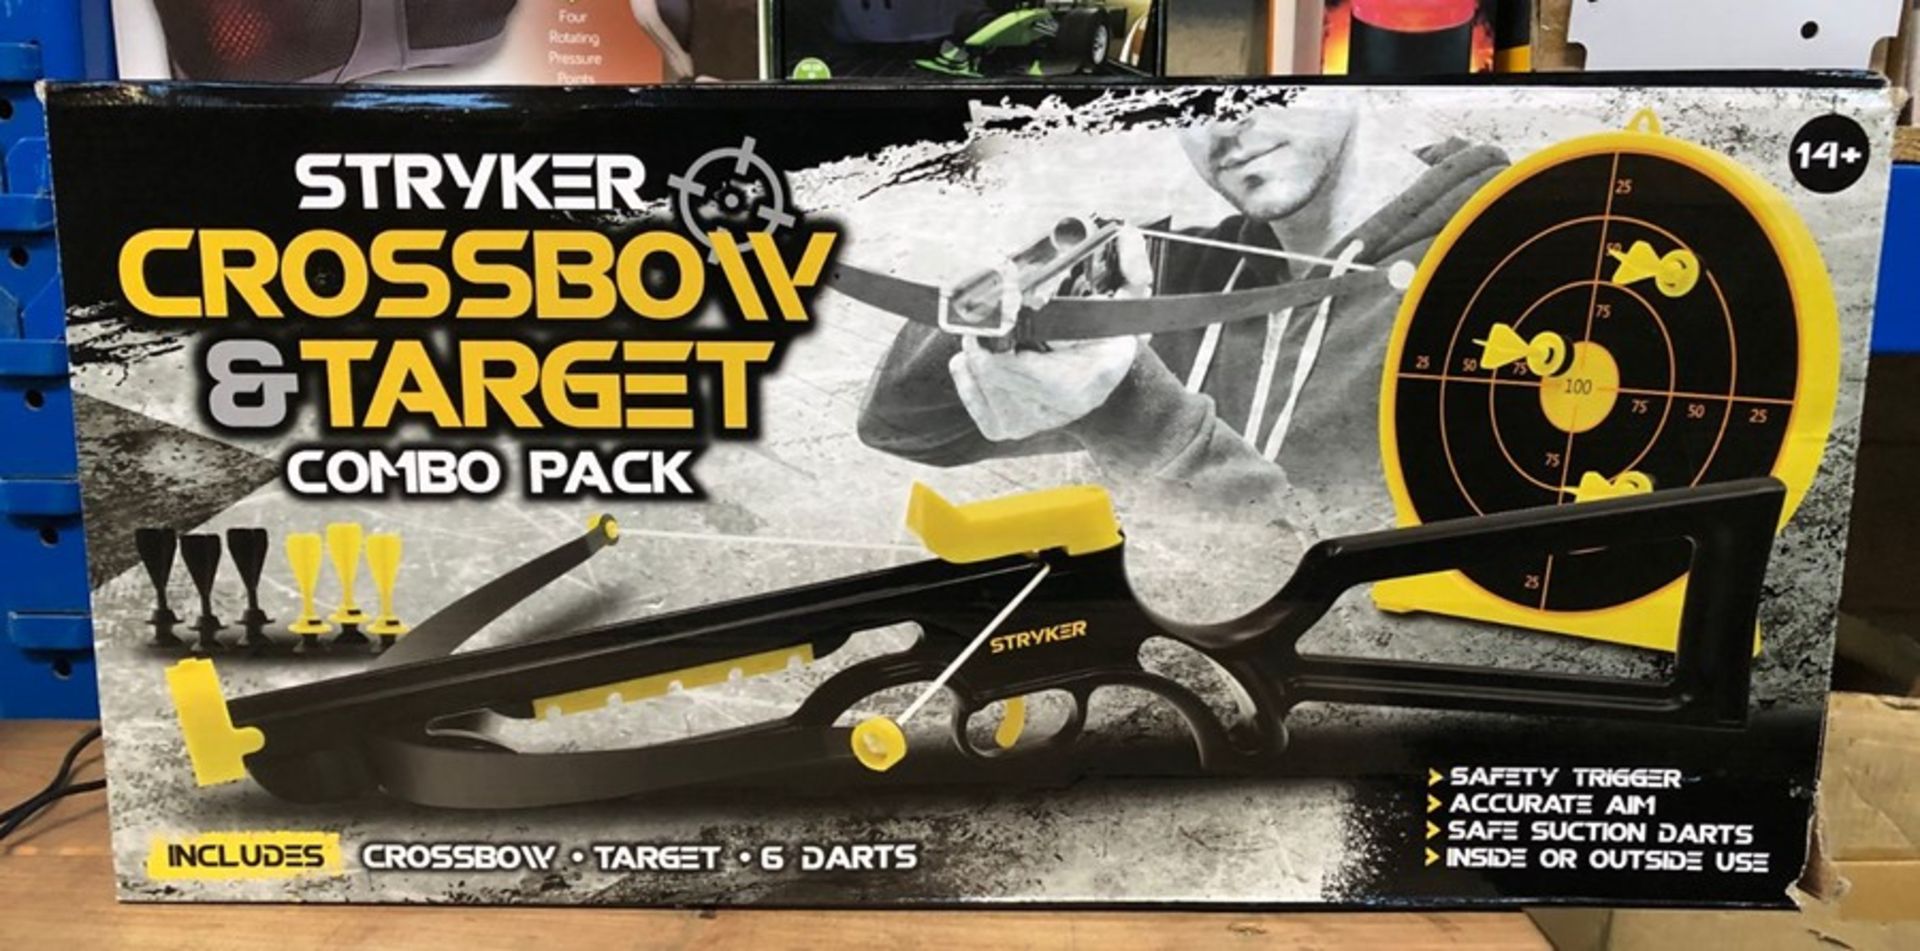 3 X STRYKER CROSSBOW AND TARGET COMBO PACKS / COMBINED RRP £60.00 / UNTESTED CUSTOMER RETURNS